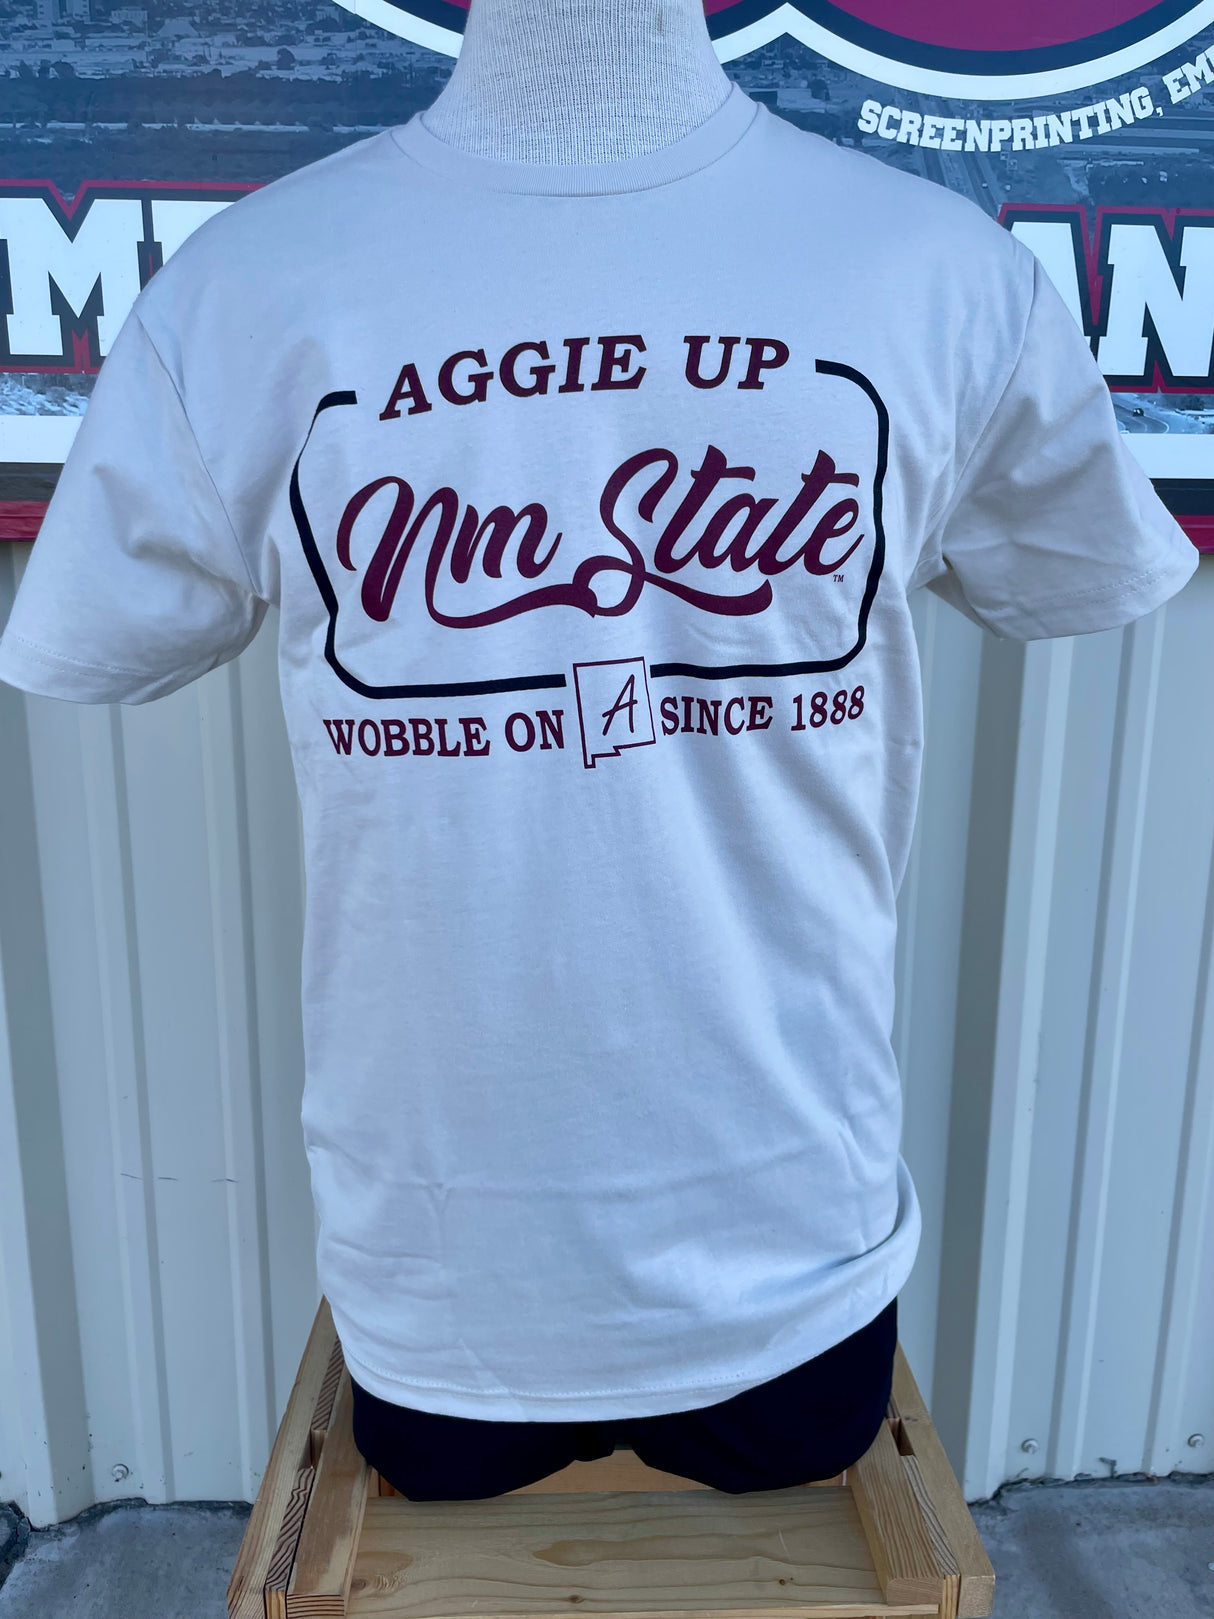 Aggie Up NM State Tee